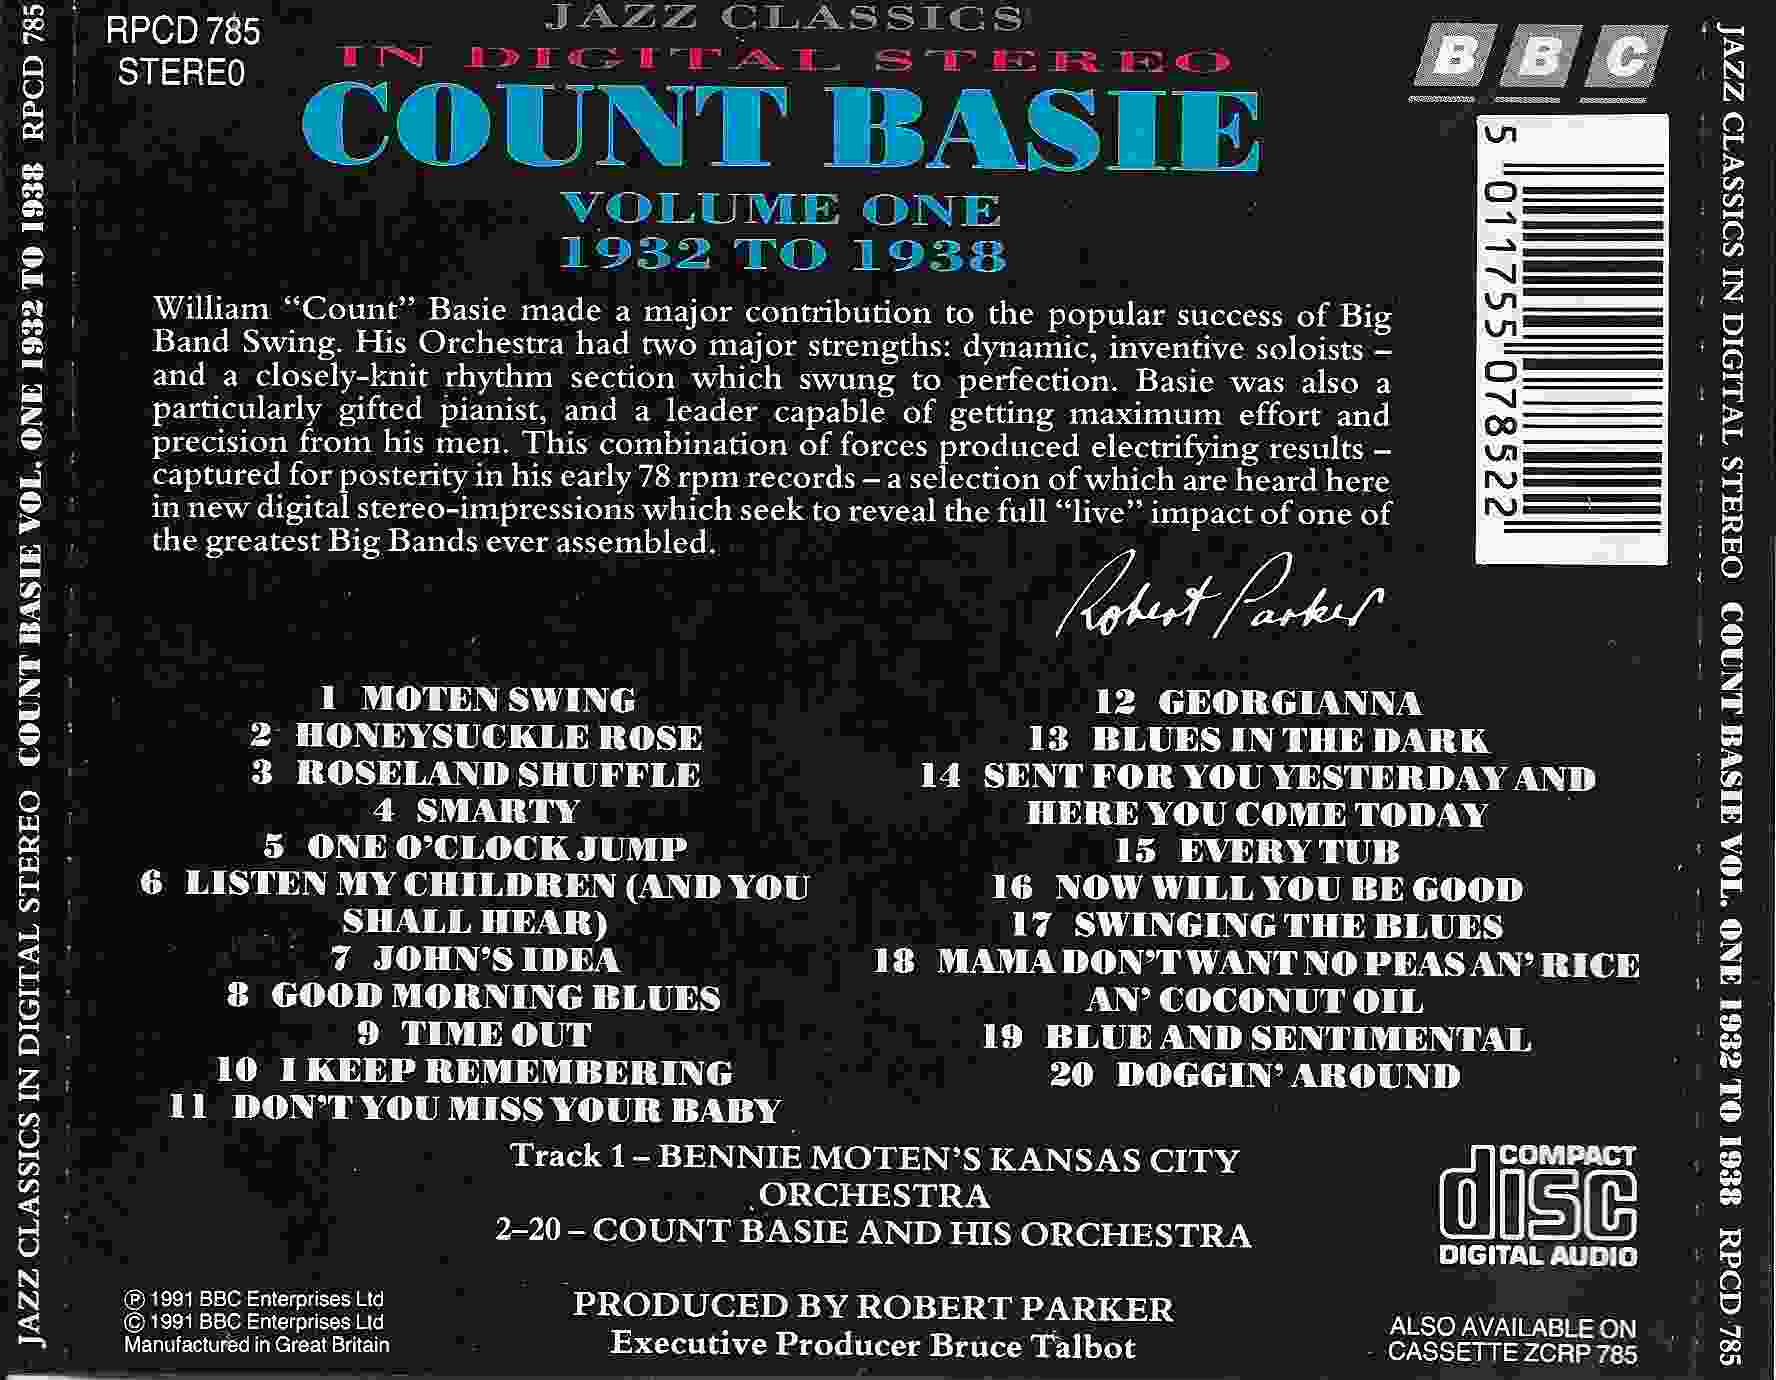 Back cover of RPCD 785